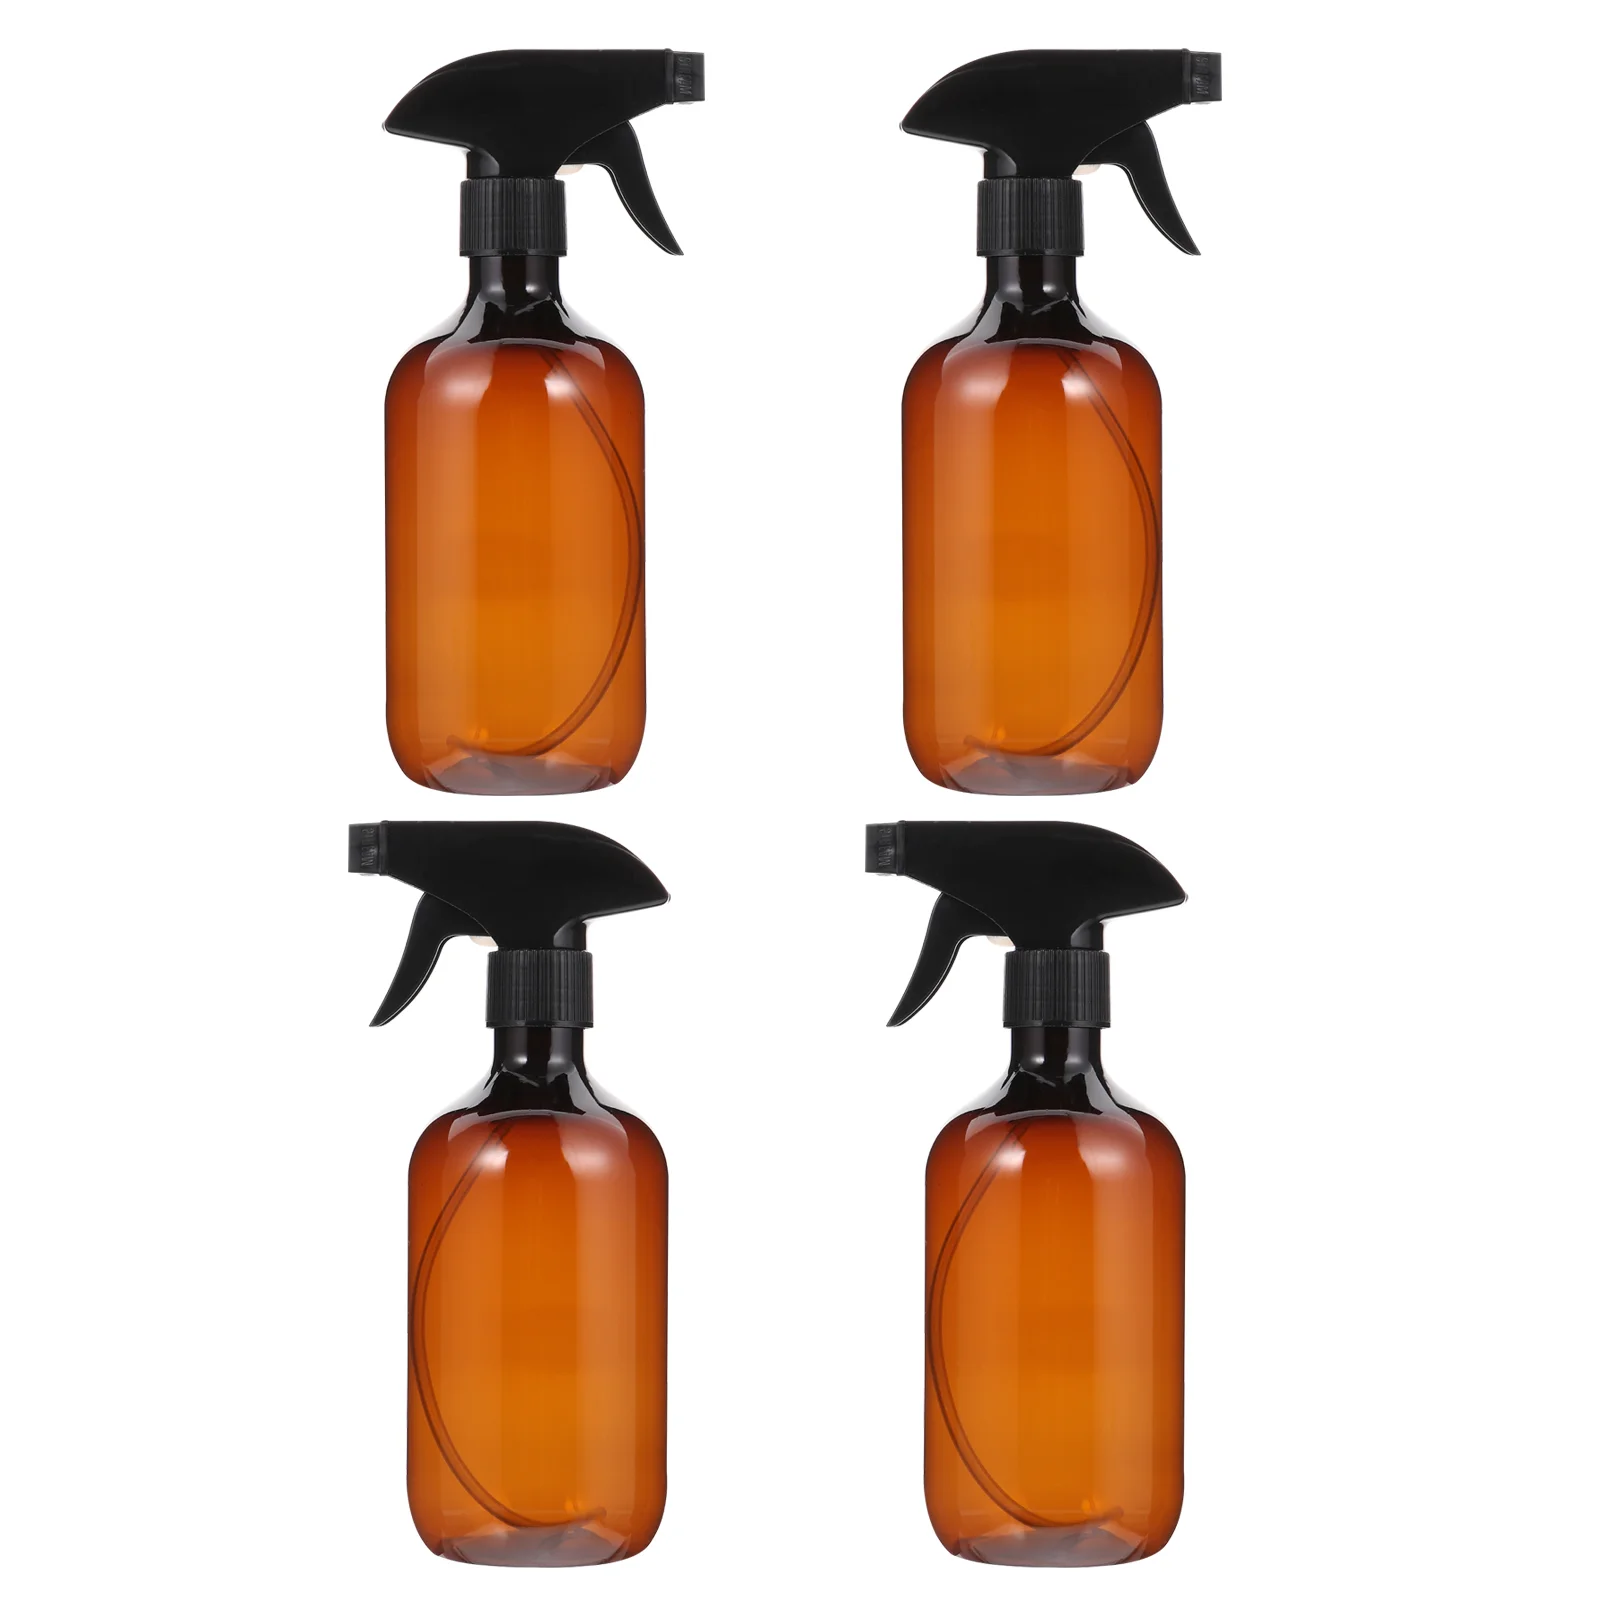 4pcs Empty Sprayer Bottle Hair Barber Sprayer 500ml Bottle Plastic Containers For Liquids Empty Plastic Bottles 1 pack plastic spray bottles empty spray bottle 16 9oz 500ml water bottle for cleaning solutions plants pet hair cooking